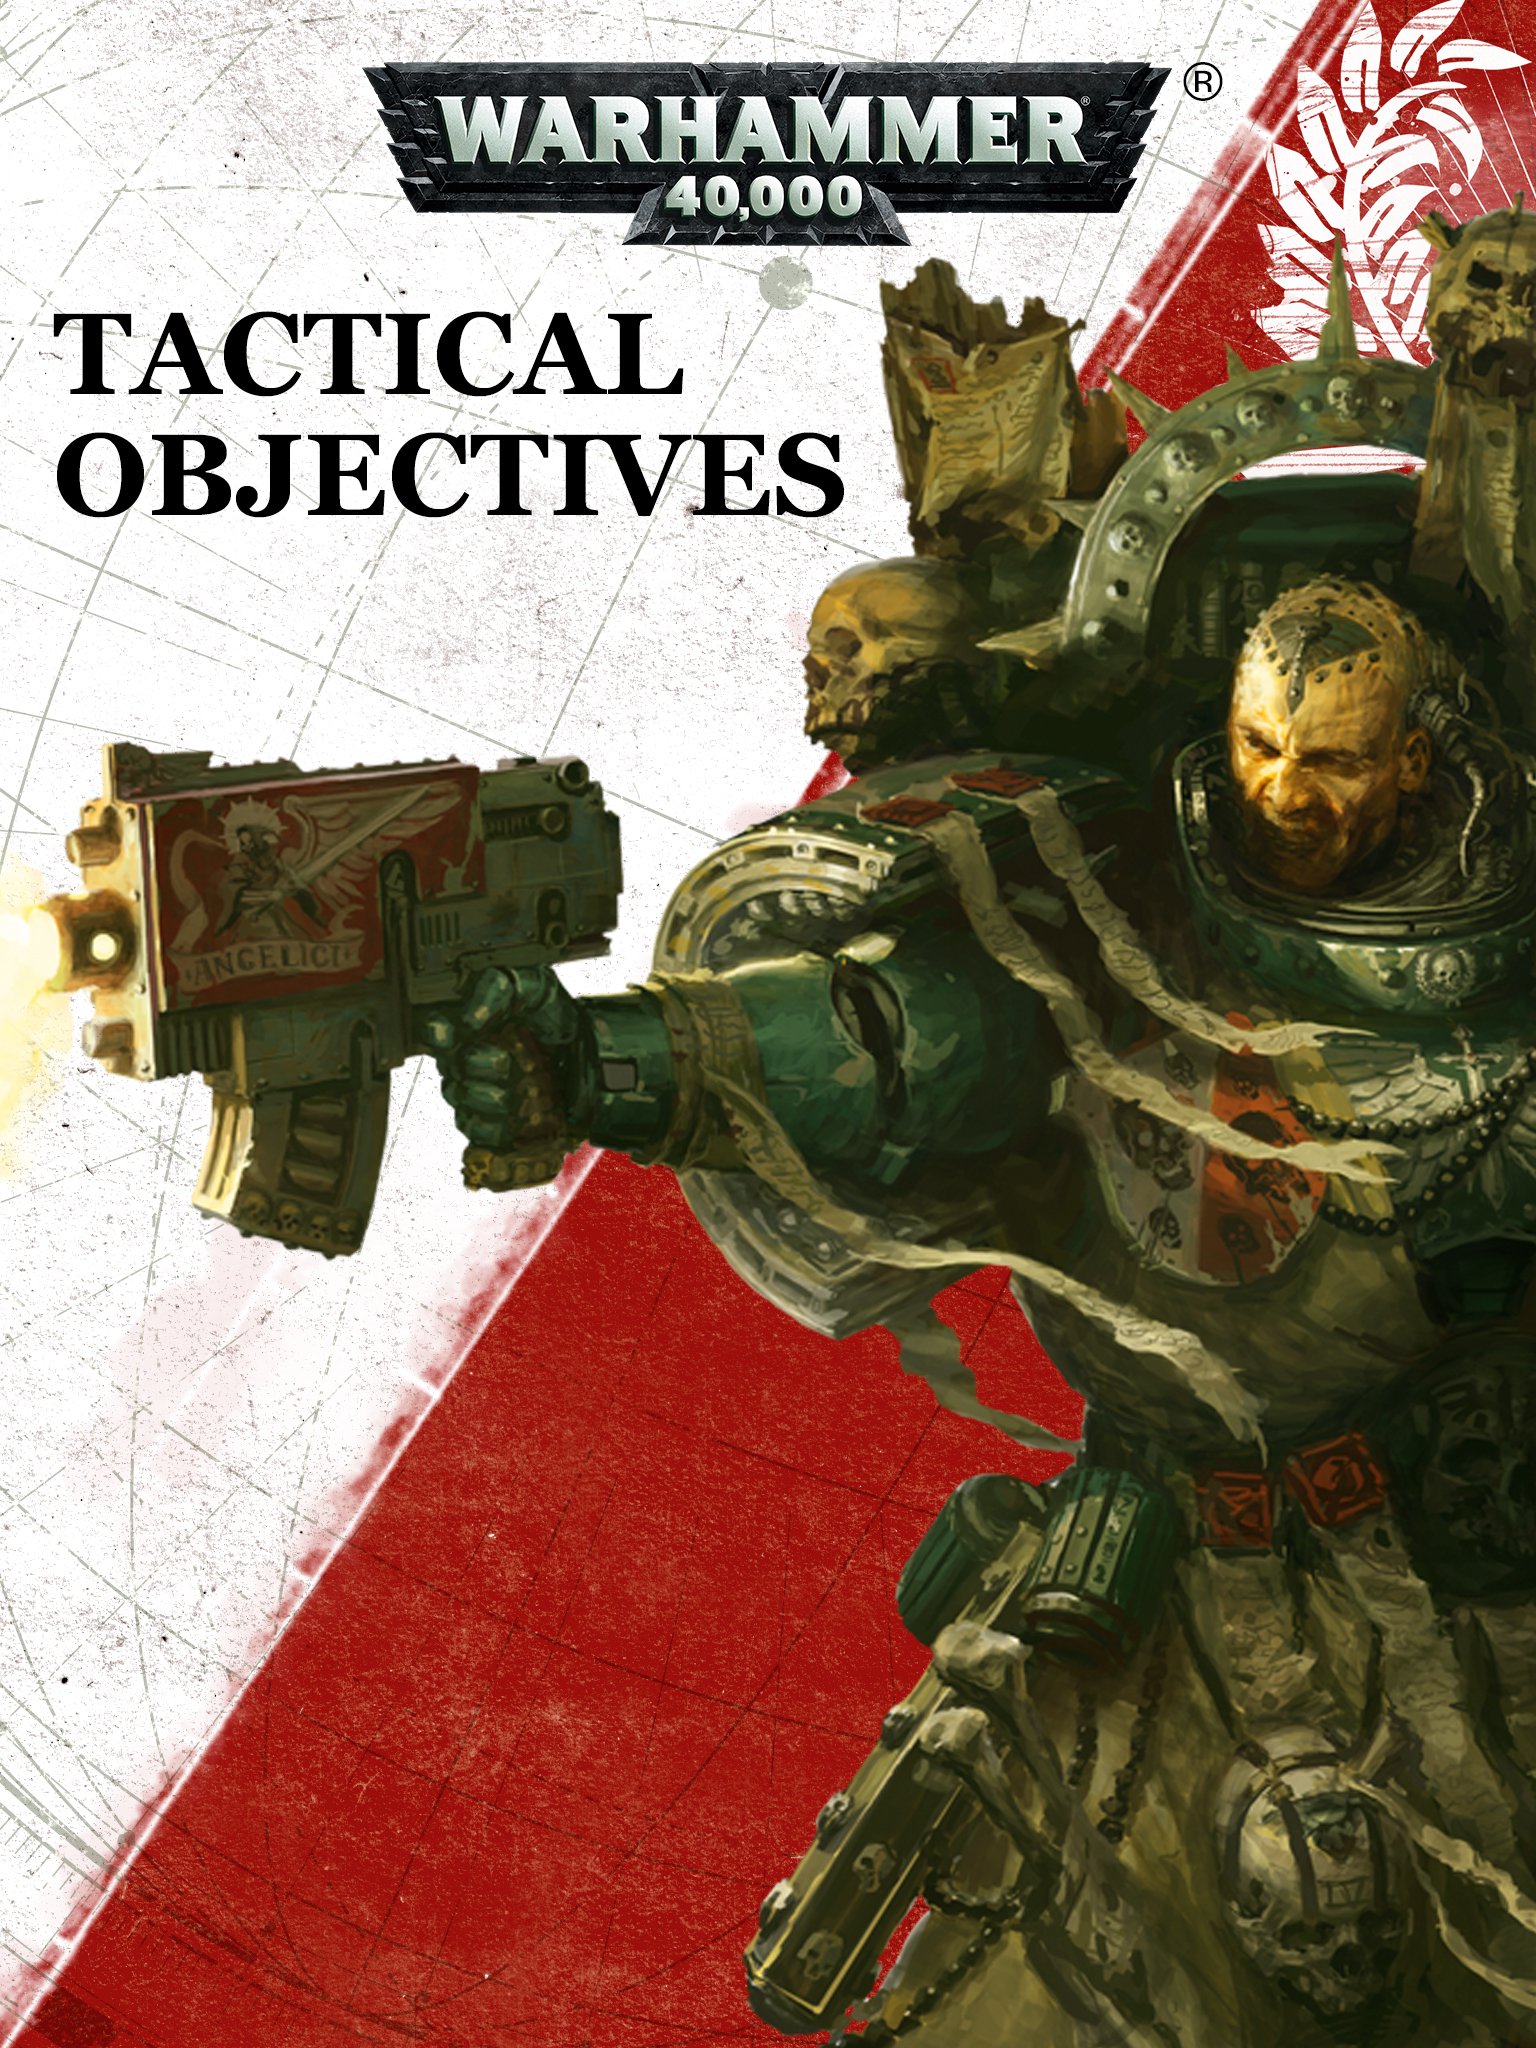 Warhammer 40K Tactical Objectives